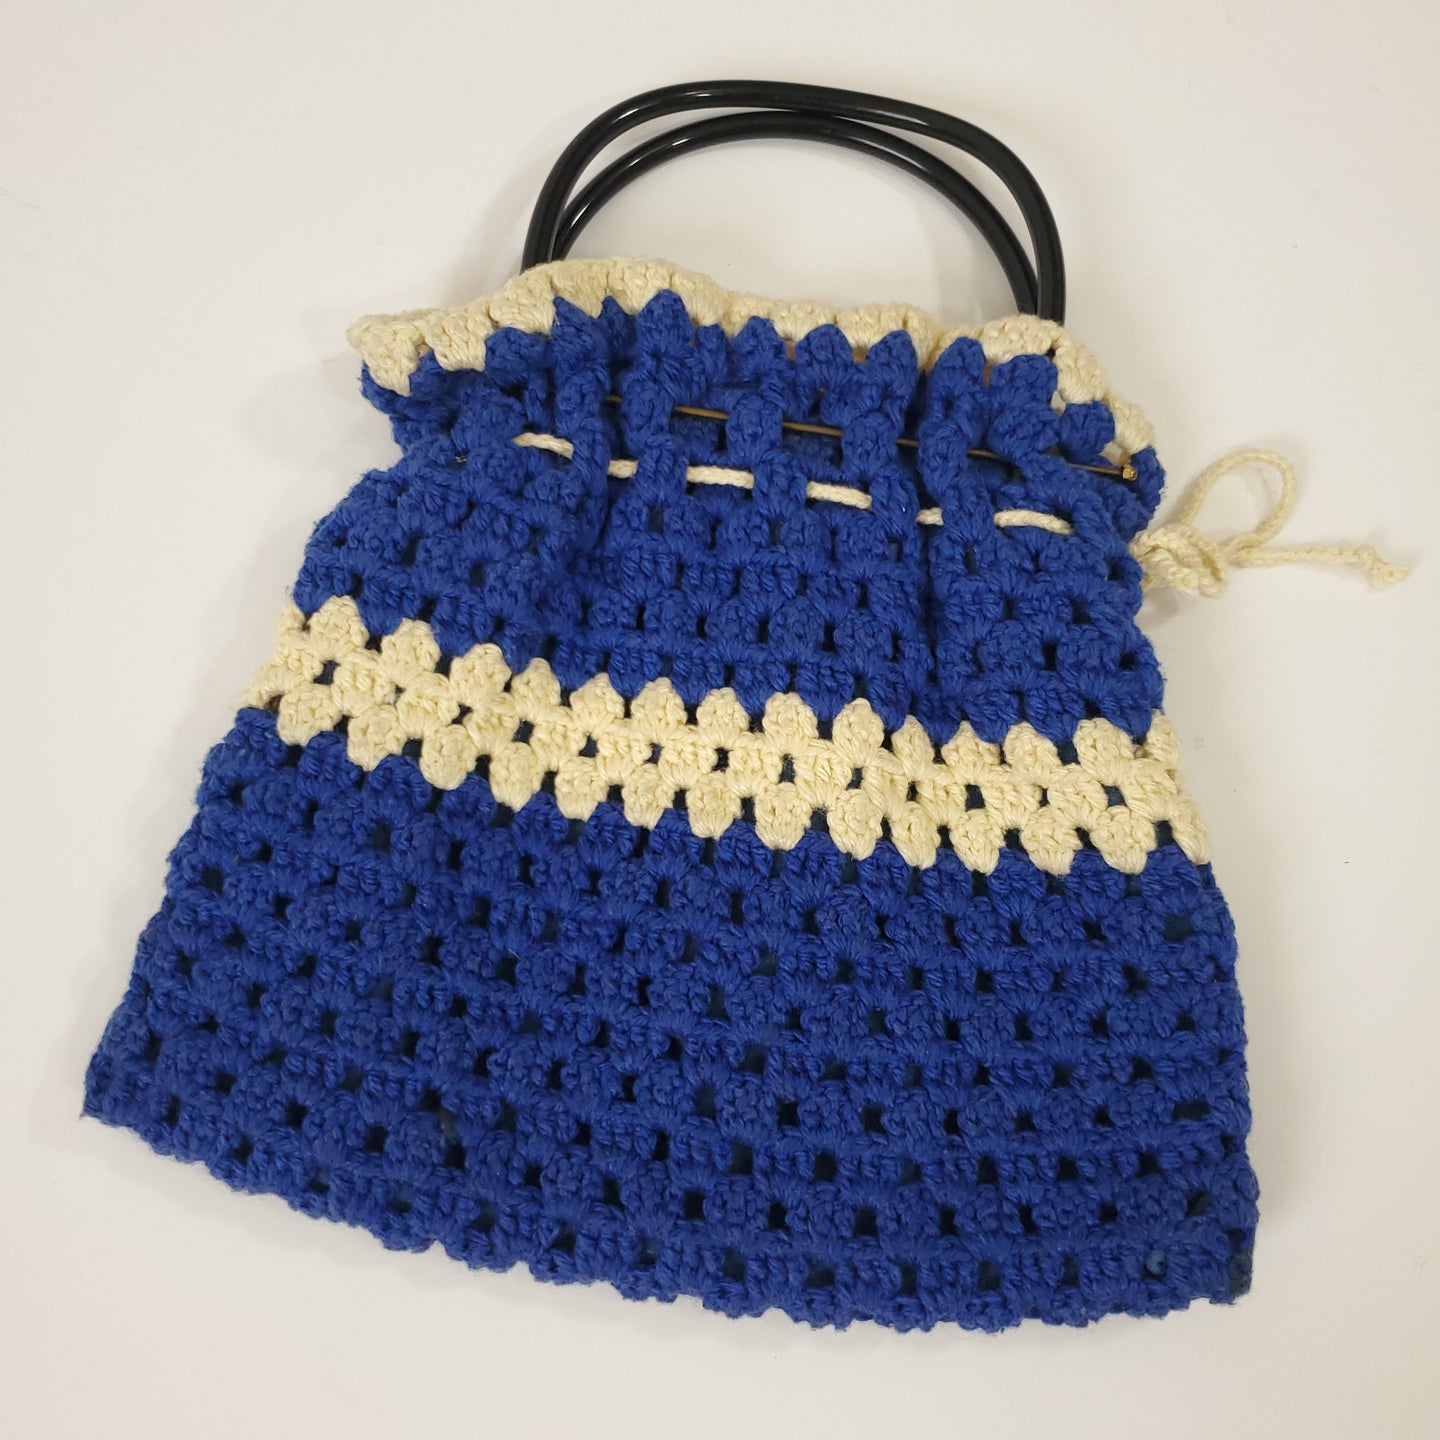 Vintage 70's Knit Purse with Handles Blue & Ivory